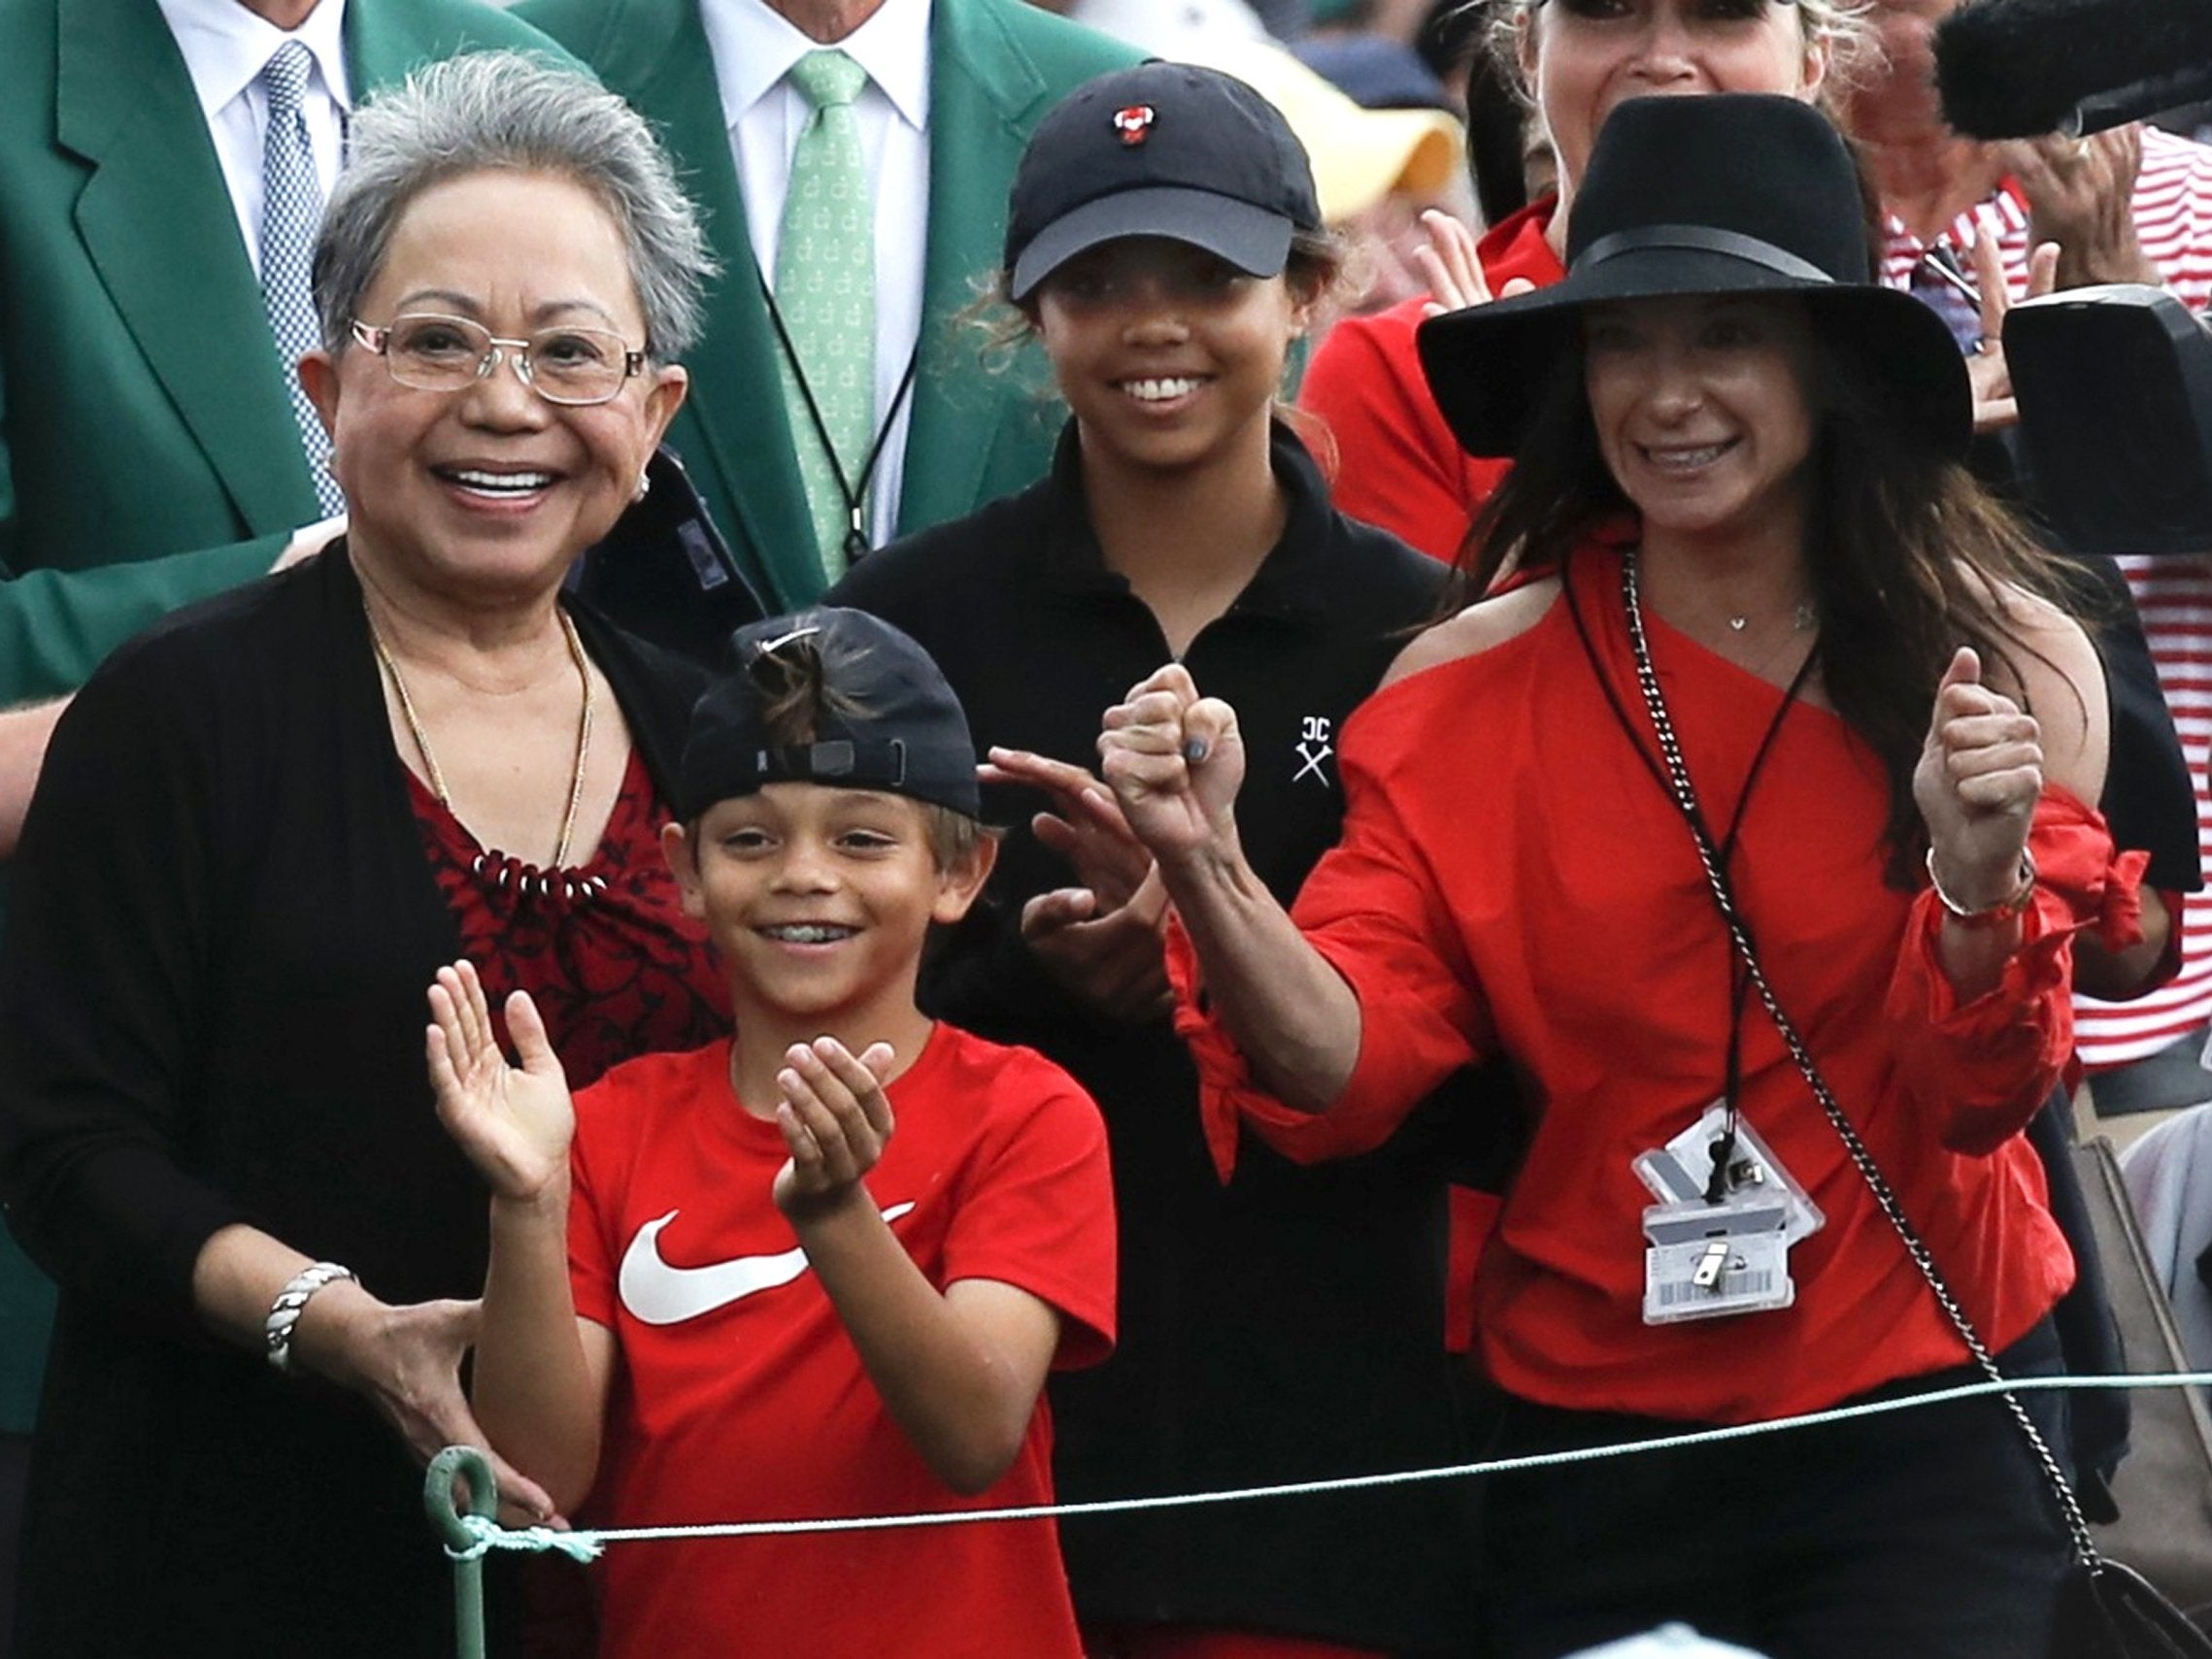 Woods was watched by his mother, two children and partner as he powered to victory